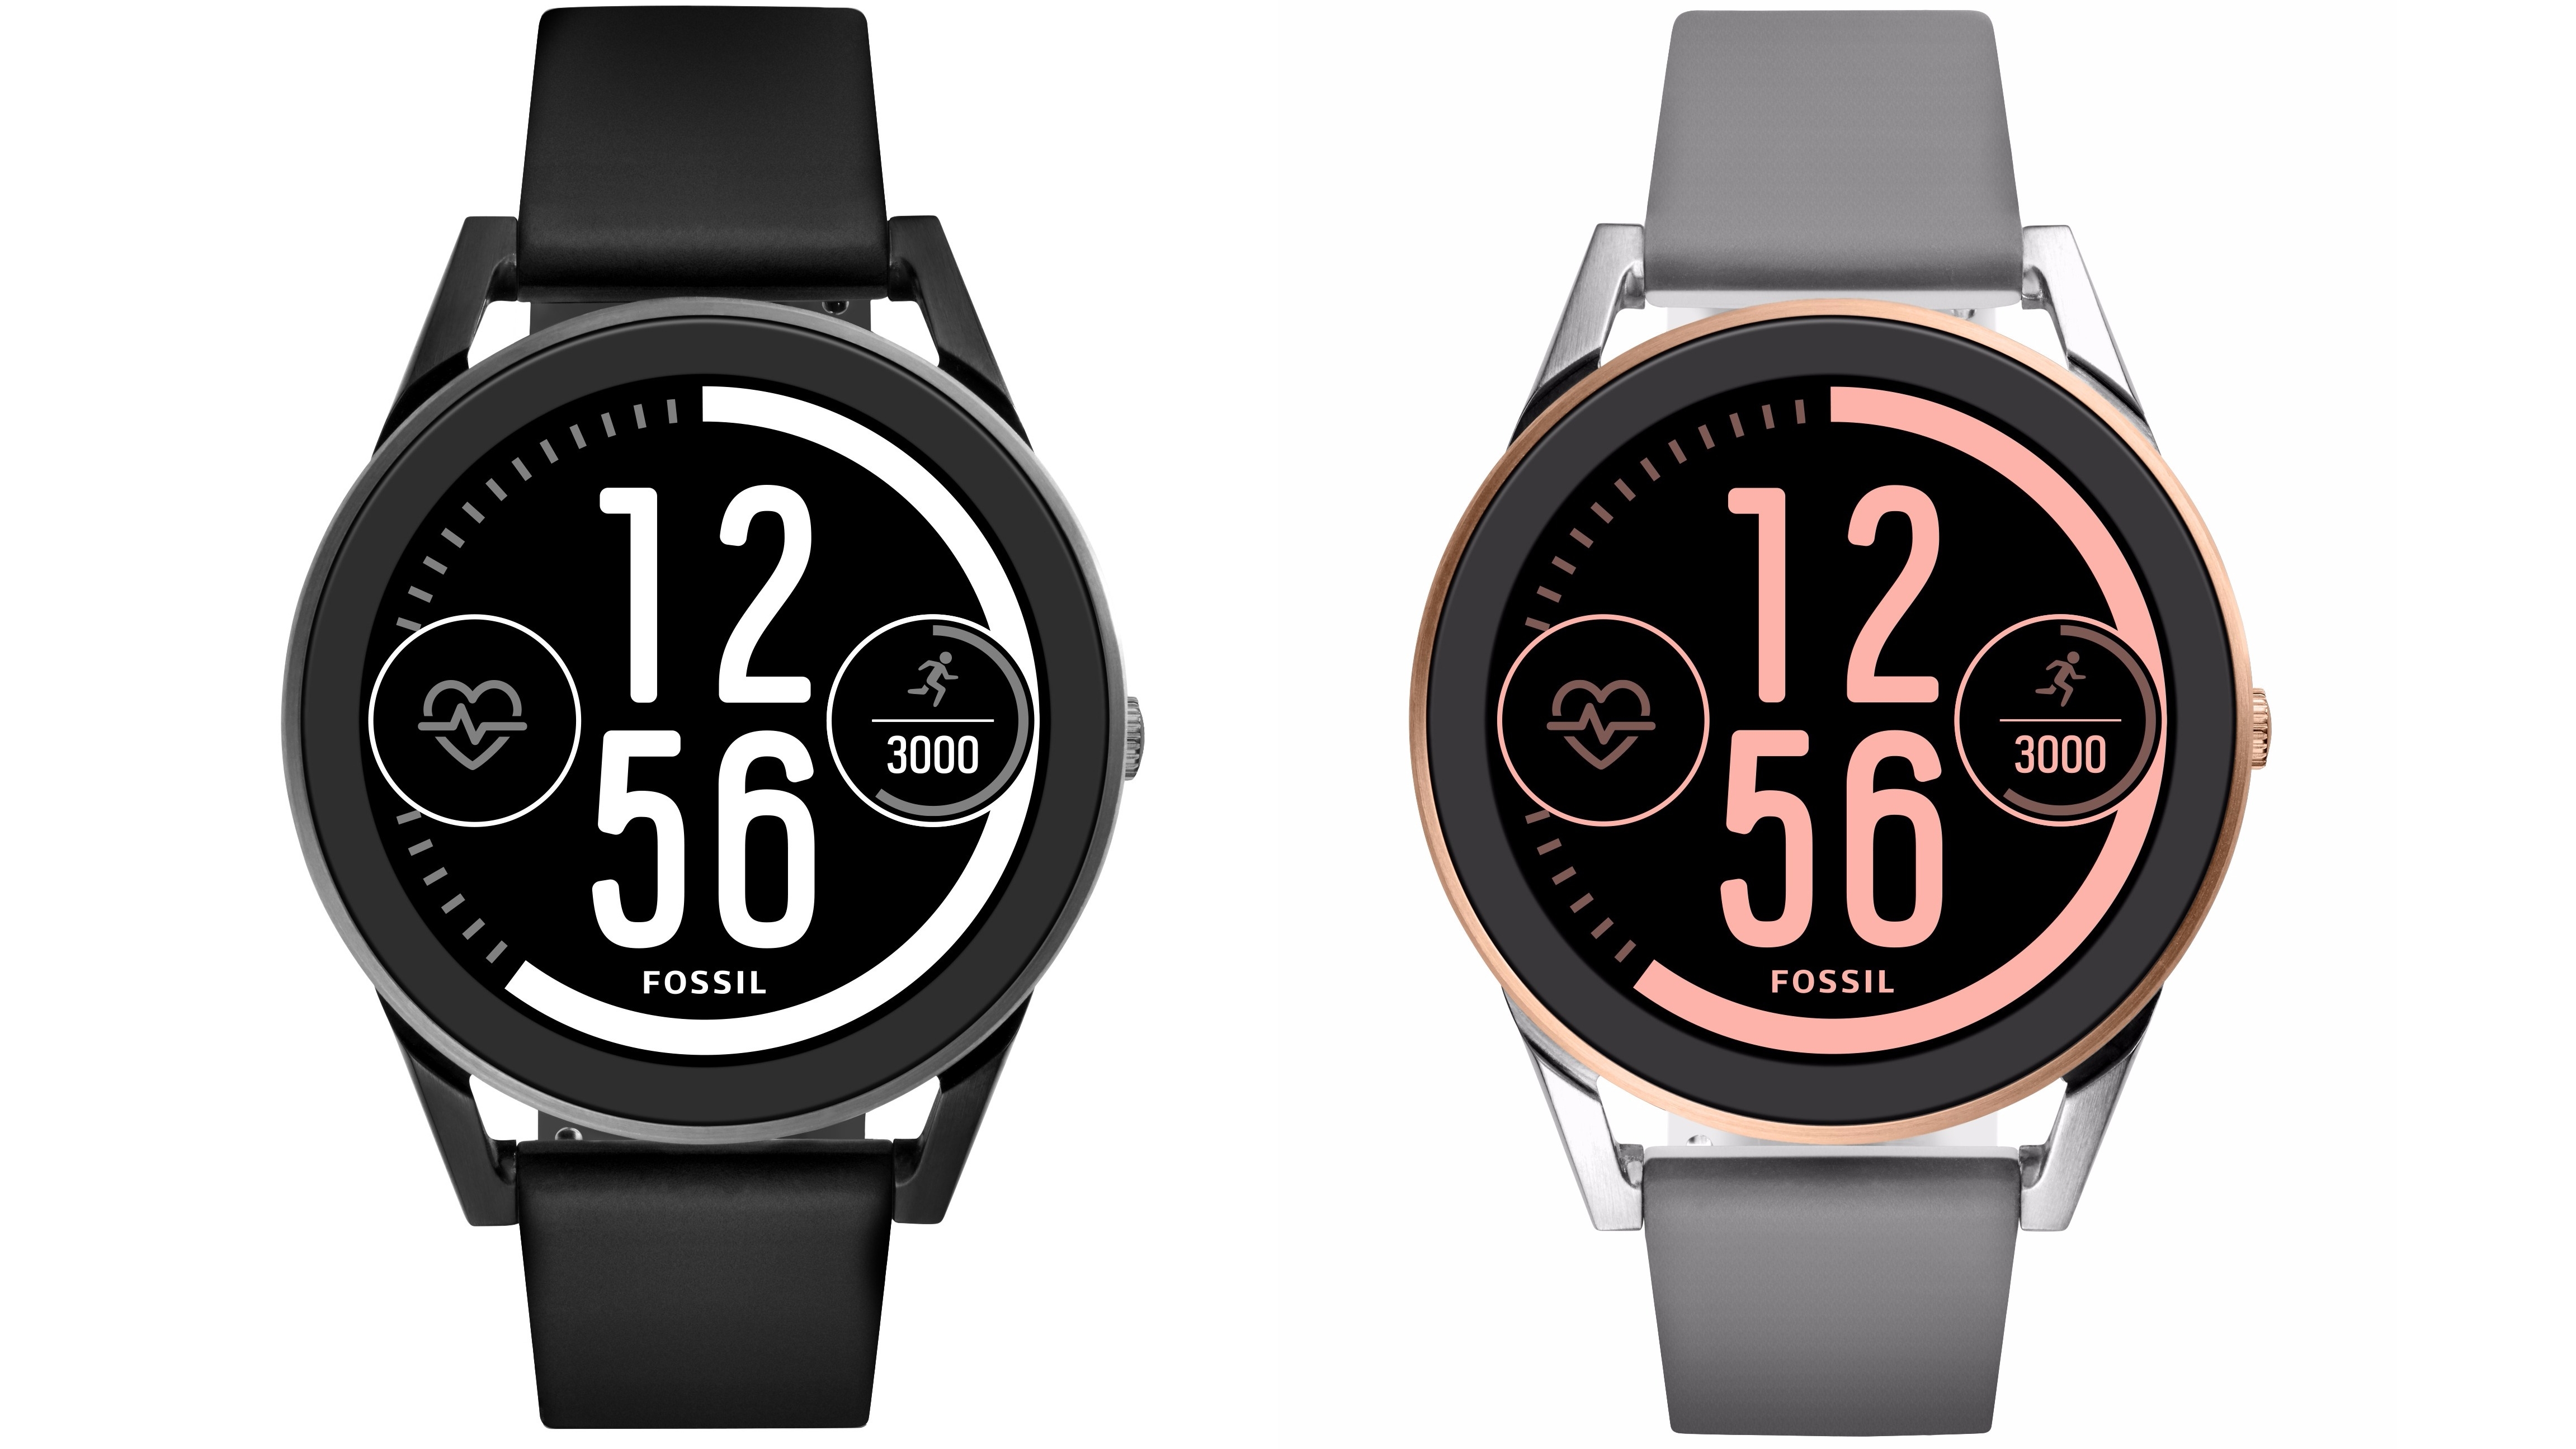 Fossil Q Control is a waterproof 